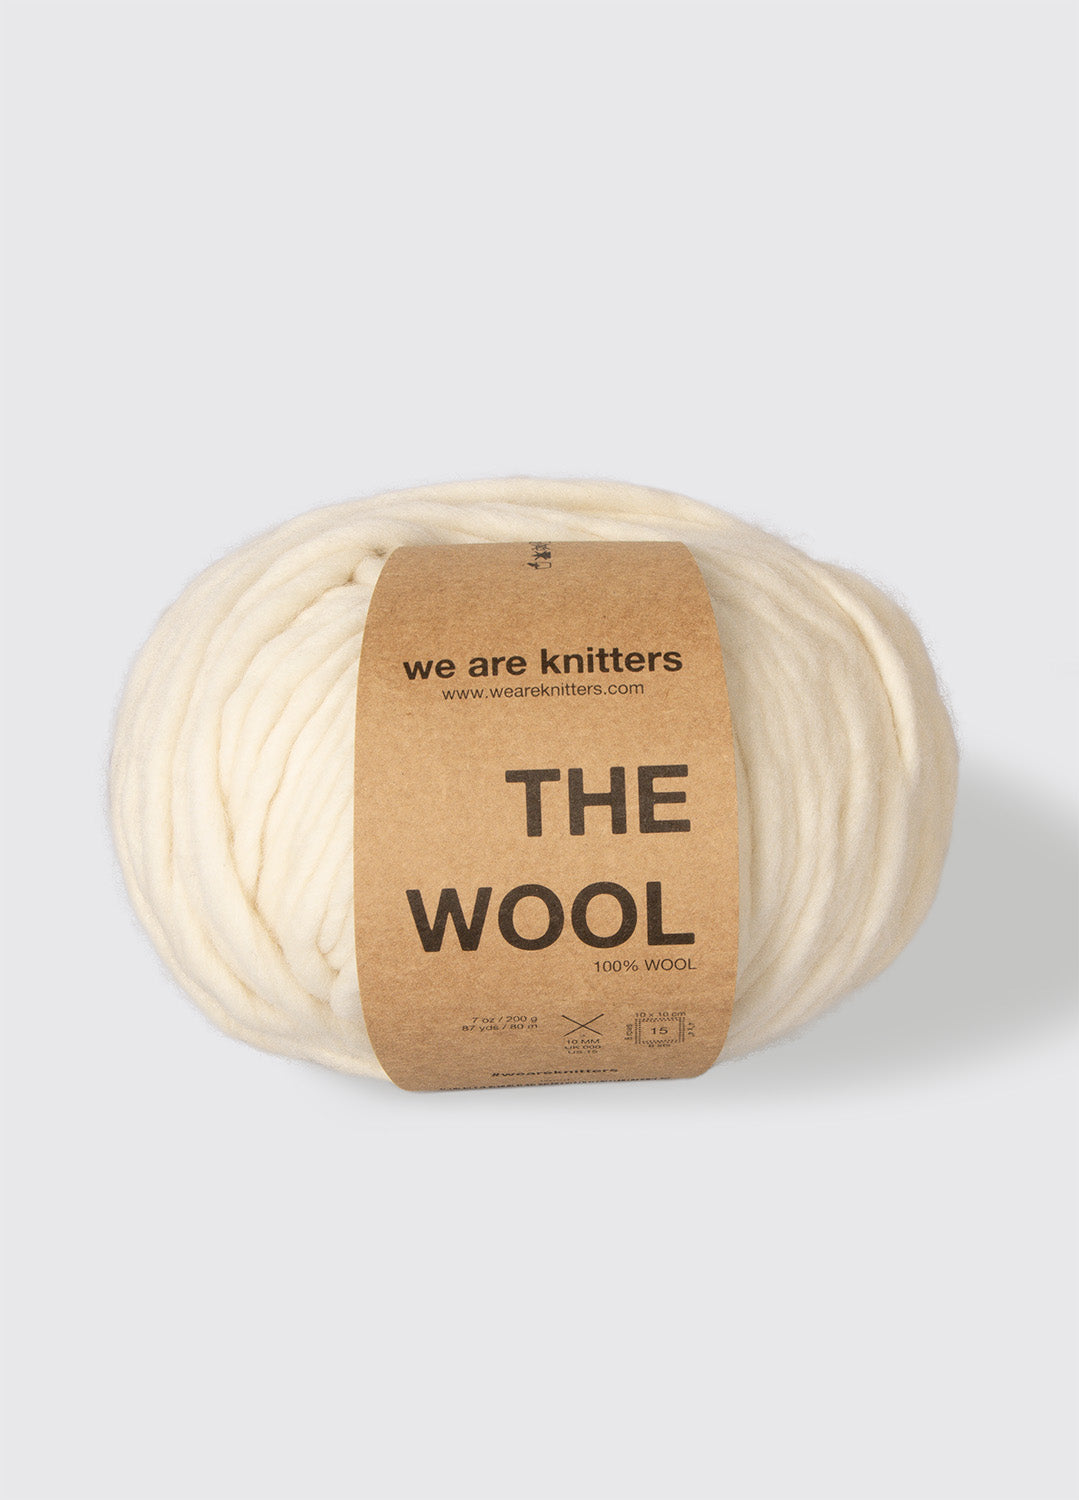 Super Bulky Weight Yarn at WEBS